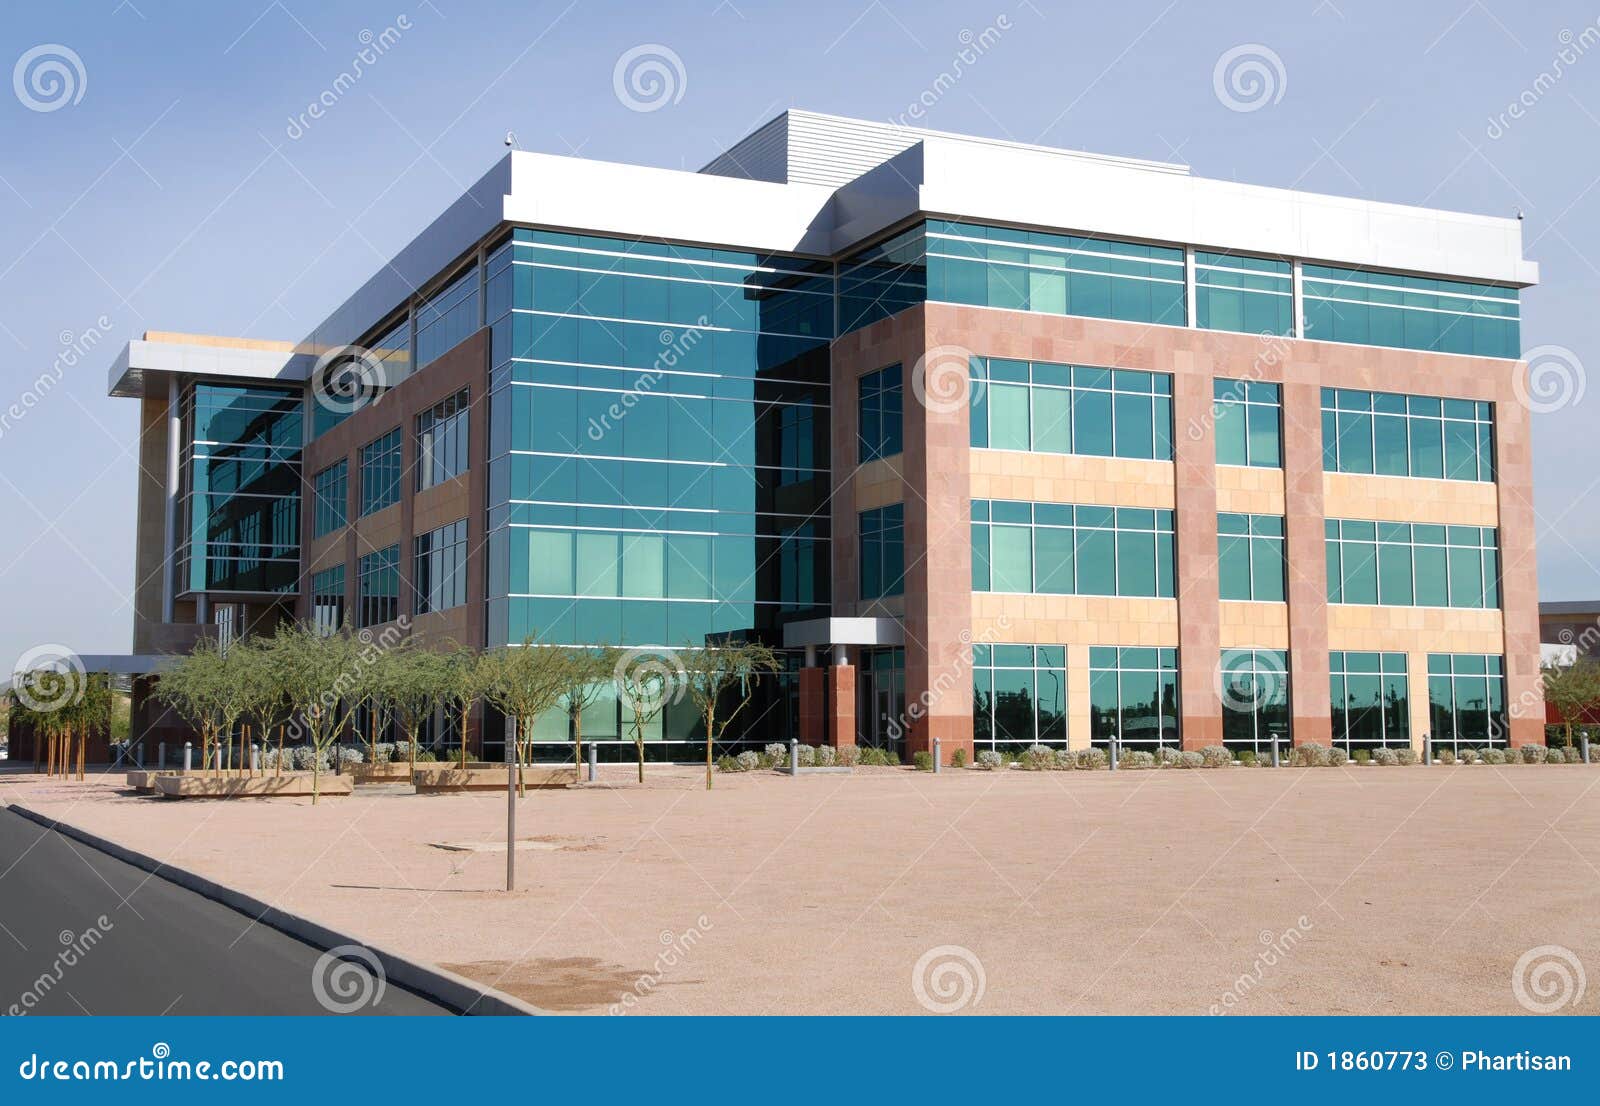 Modern Commercial Building Stock Photos - Image: 1860773